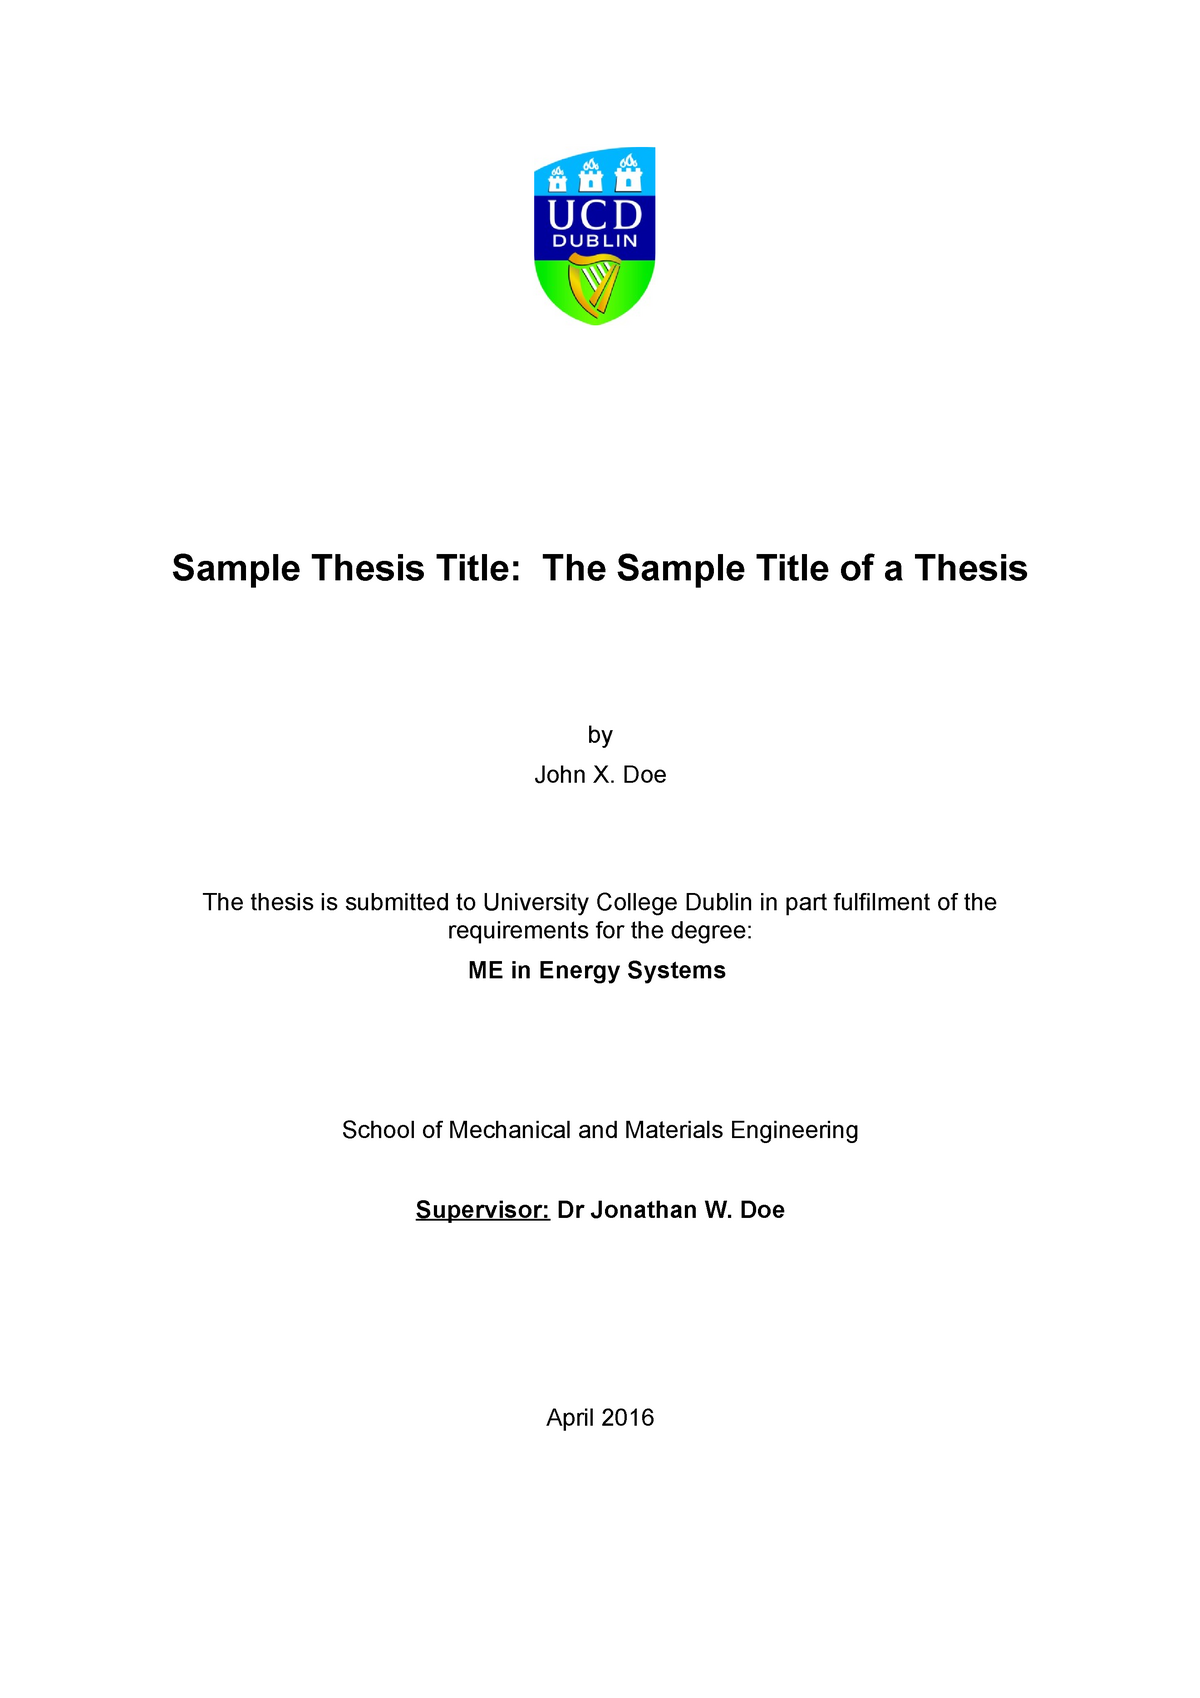 thesis submission ucd